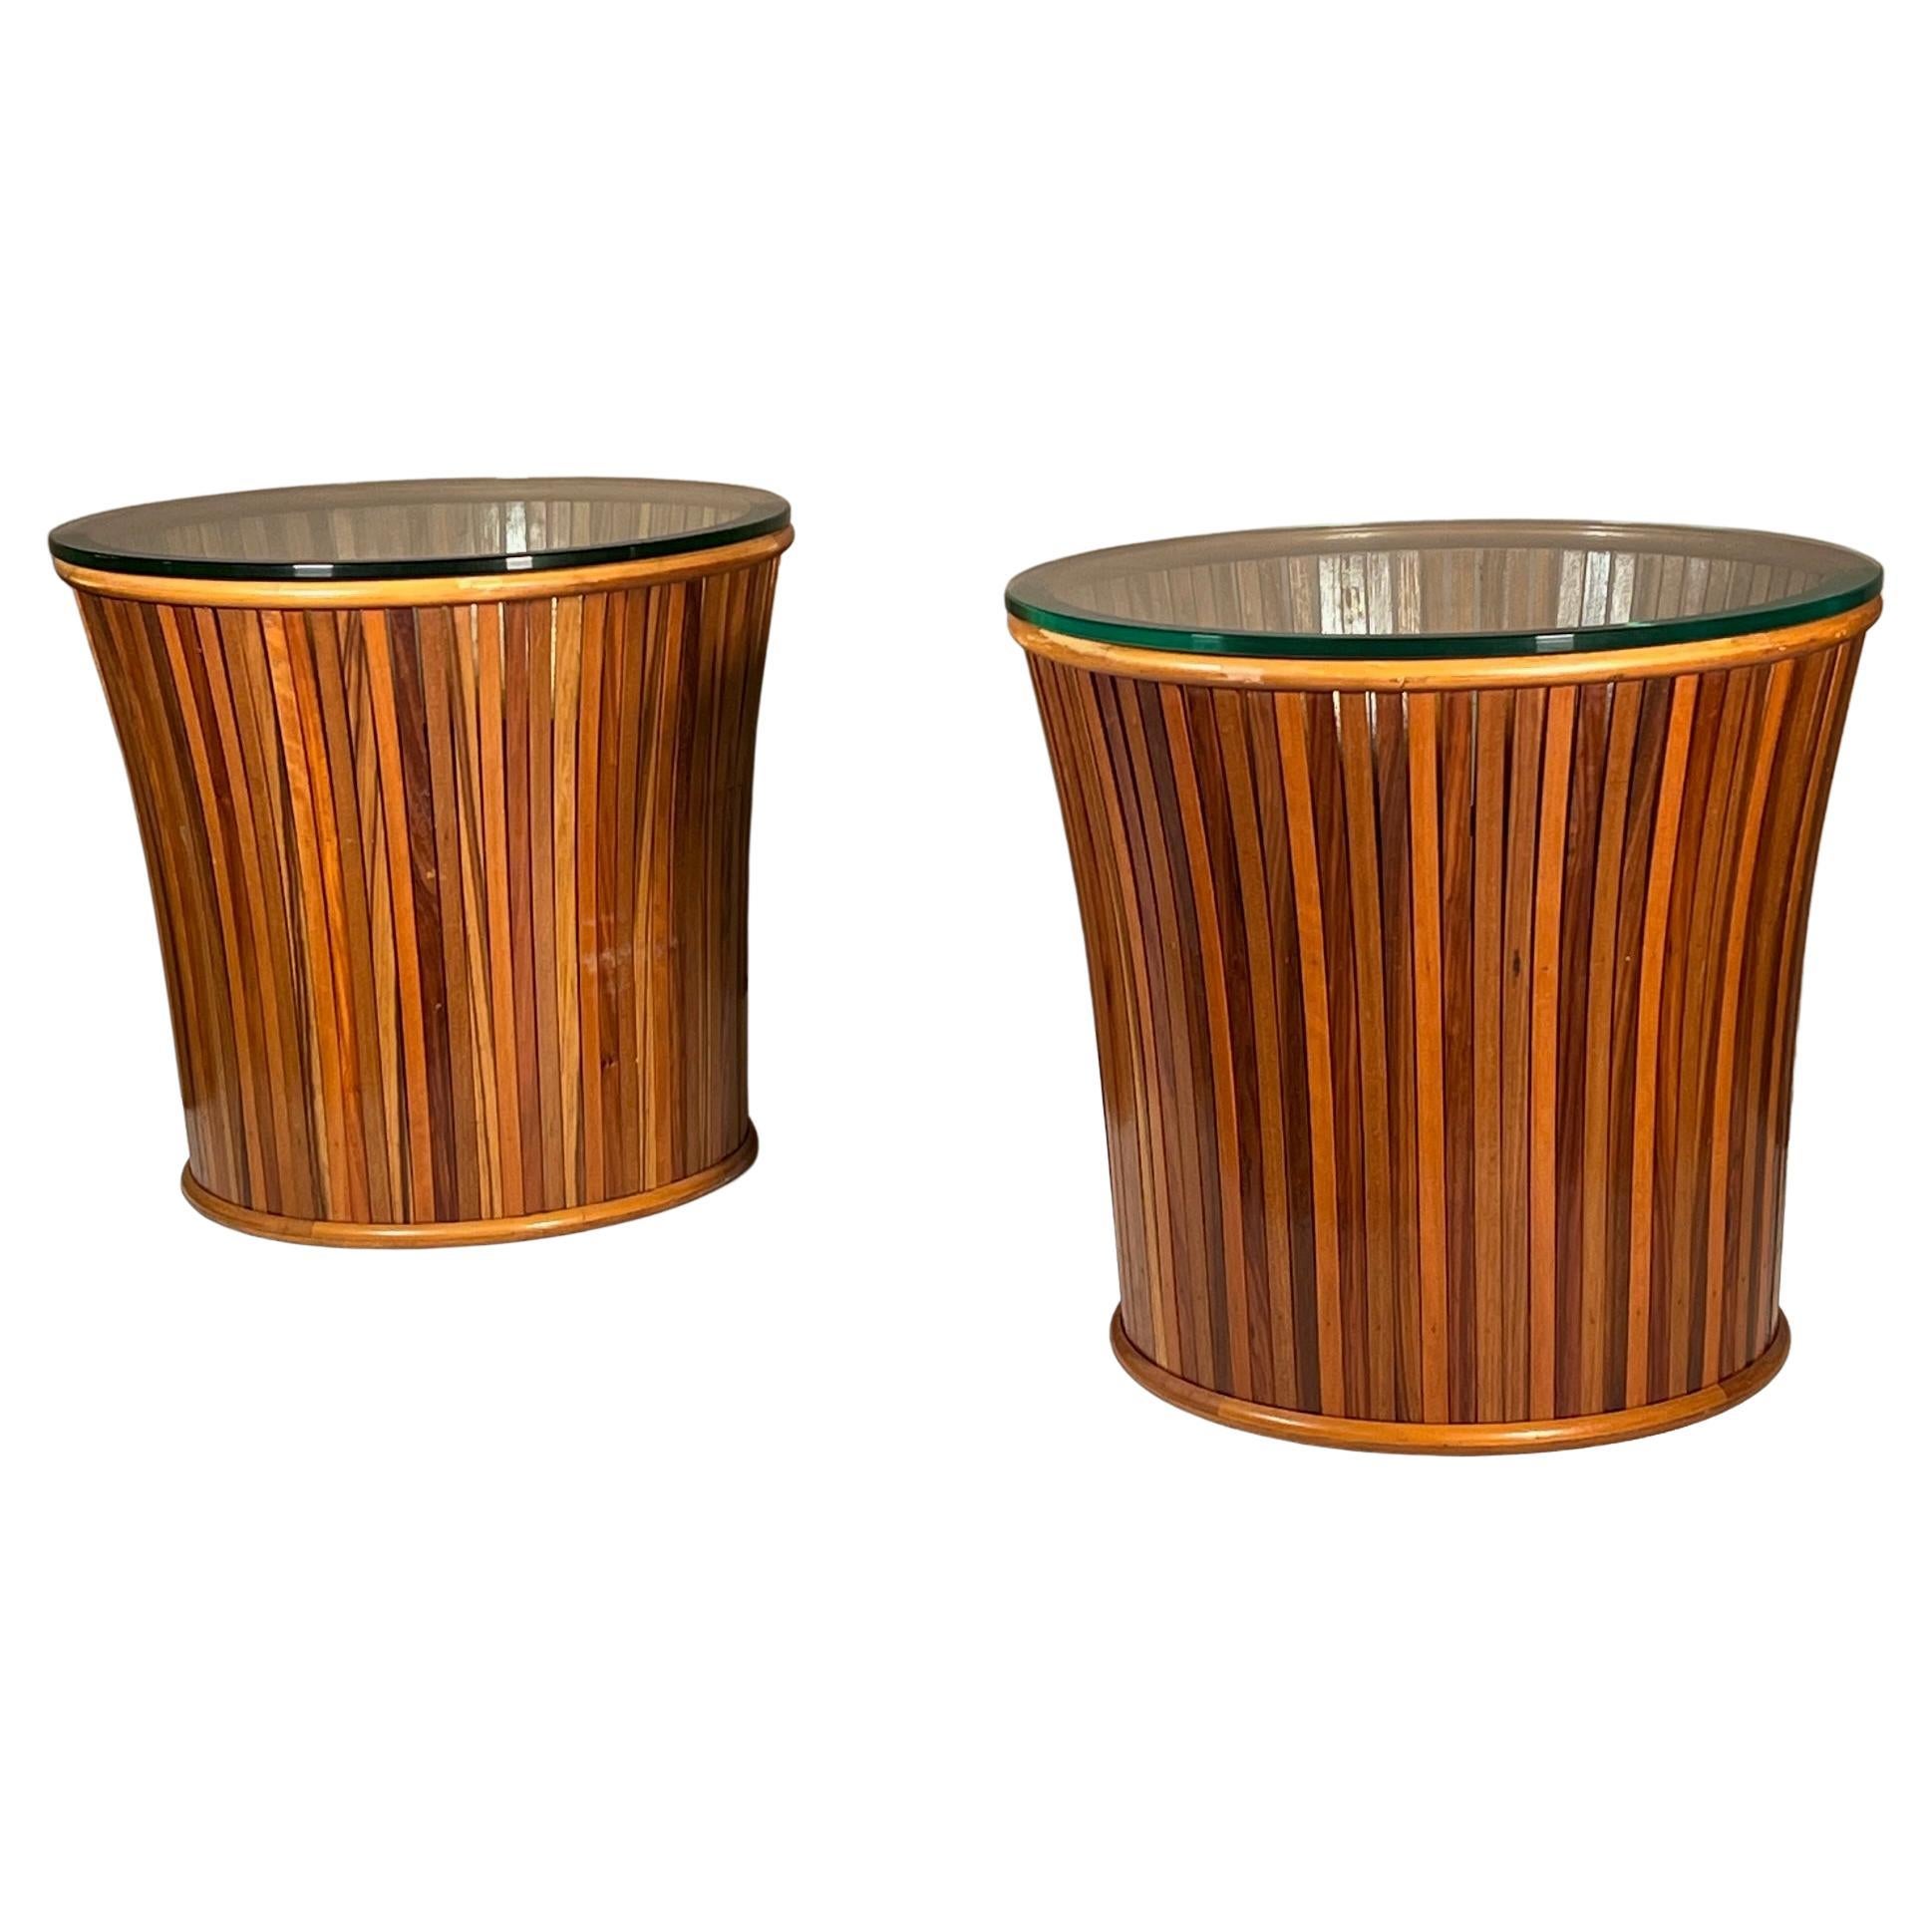 Pair of Slatted Side Tables with Glass Tops